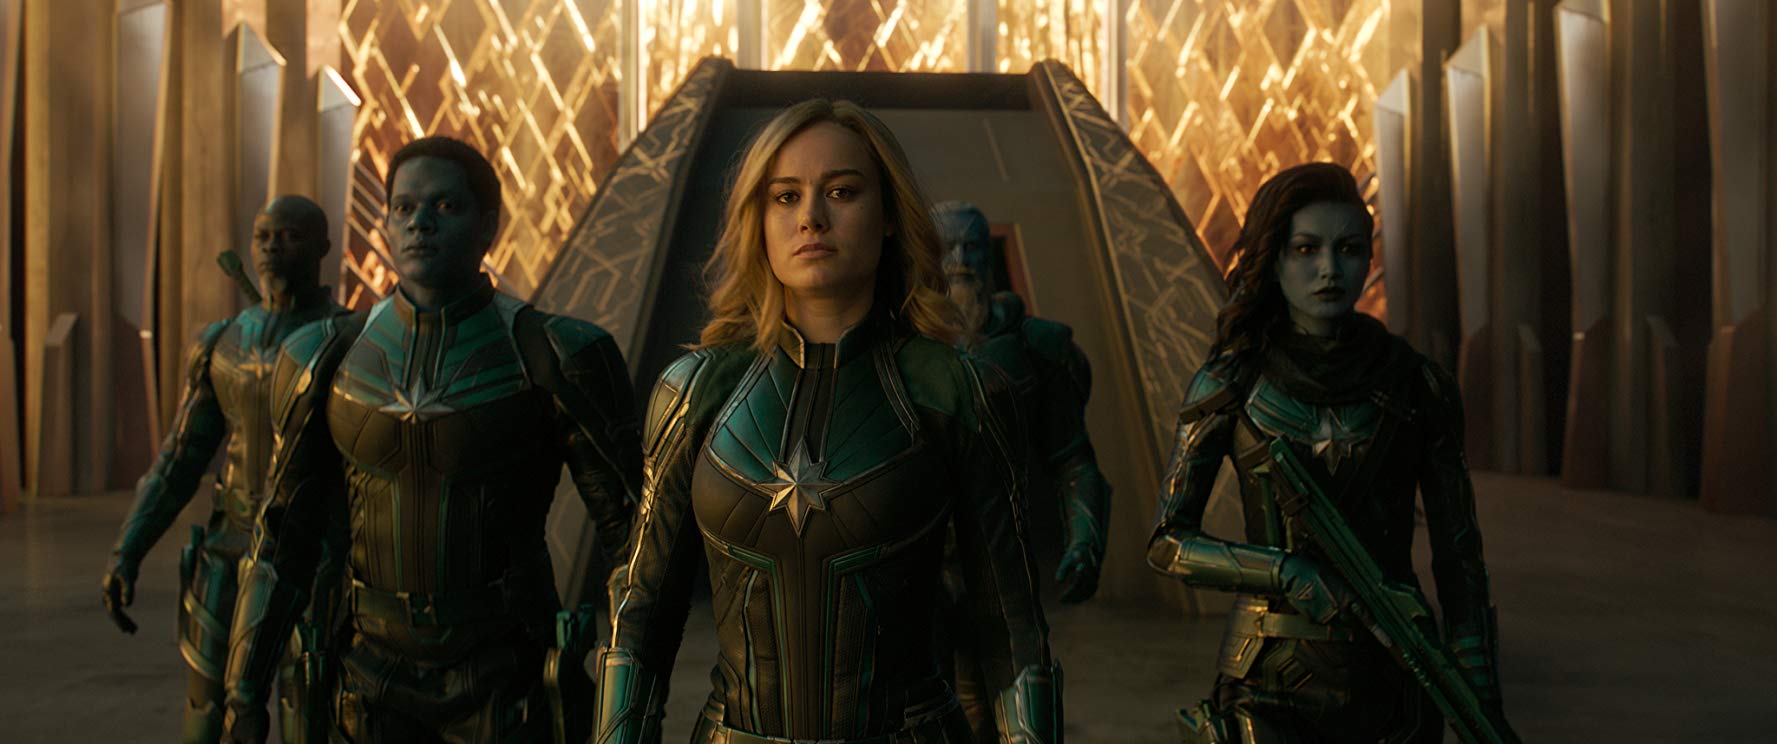 Movie Review: CAPTAIN MARVEL (2019)